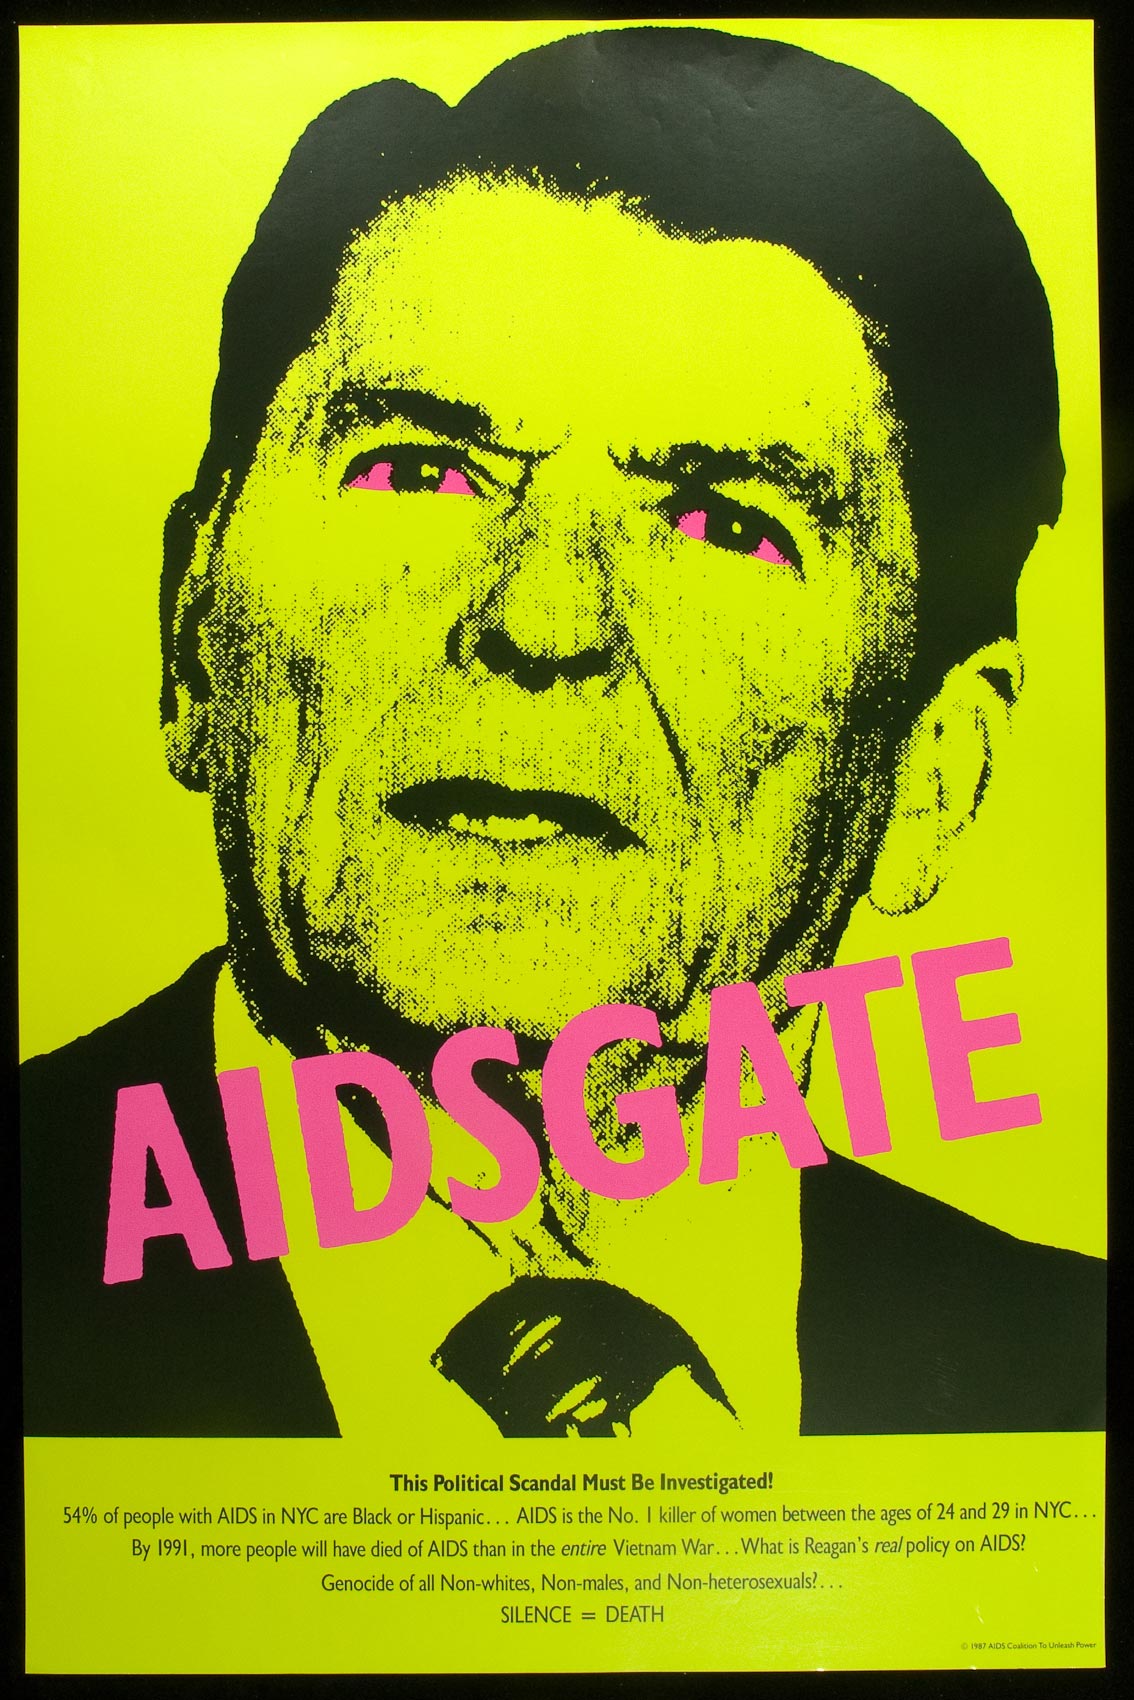 An image of Ronal Reagan in lurid lime green and black, his eyes the same pink as the text which reads AIDSGATE.